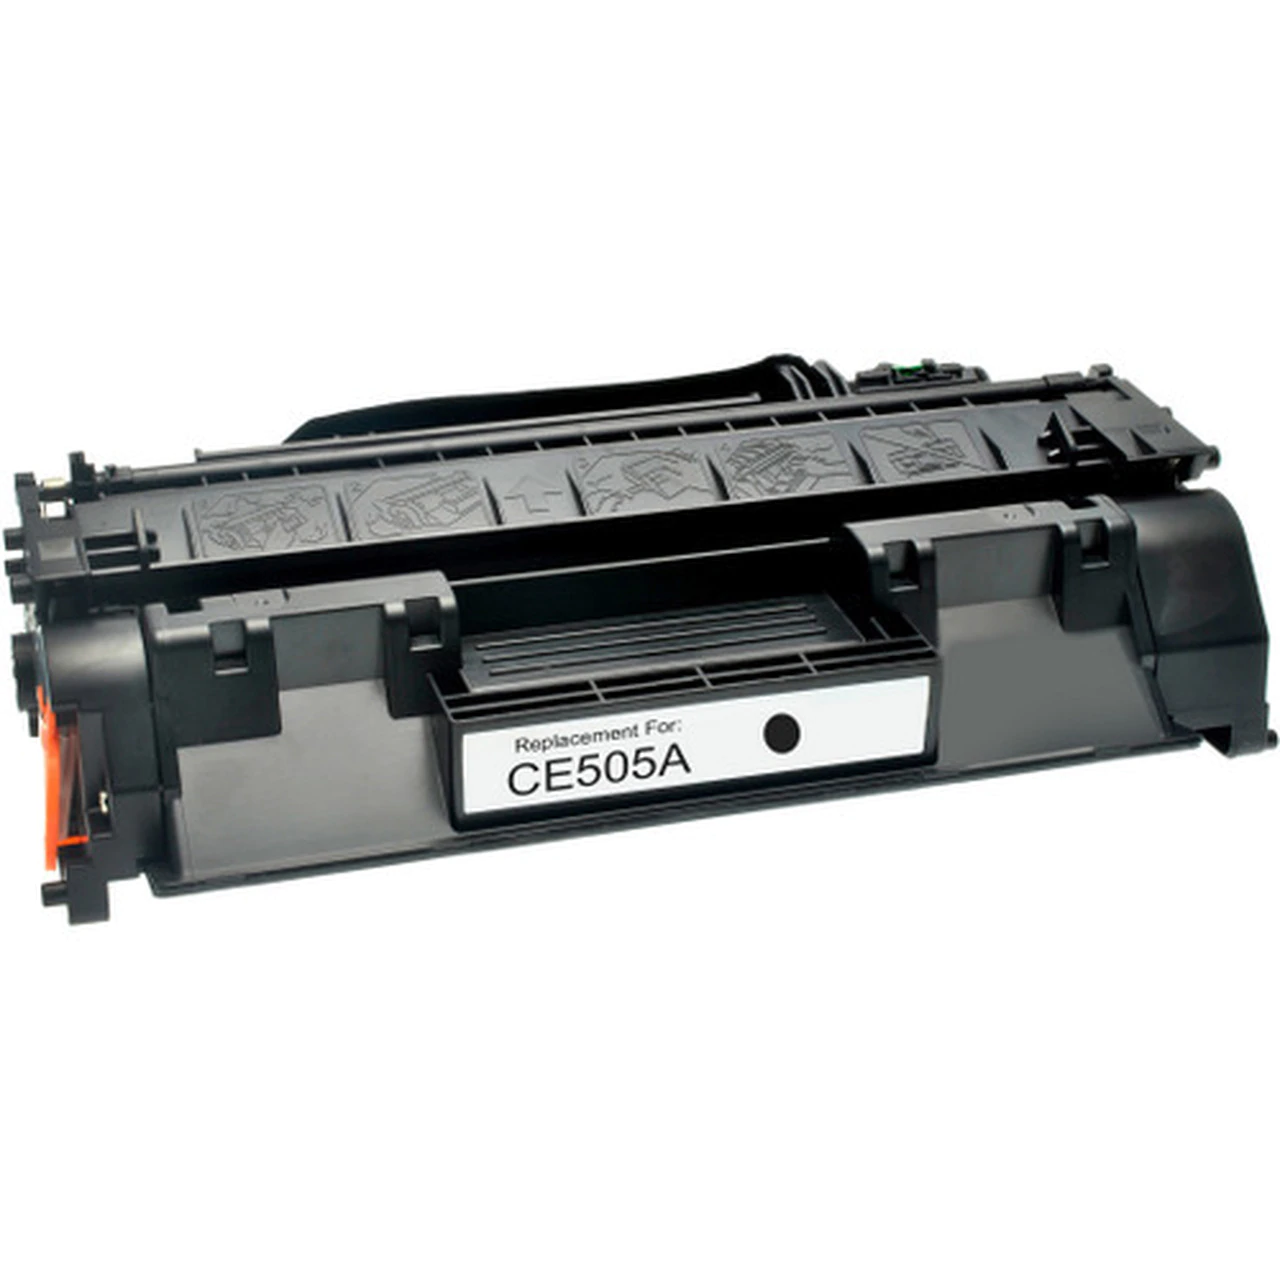 HP 05A Compatible Black Laserjet Toner Cartridge, Extended Yield, 3,500 Page Yield